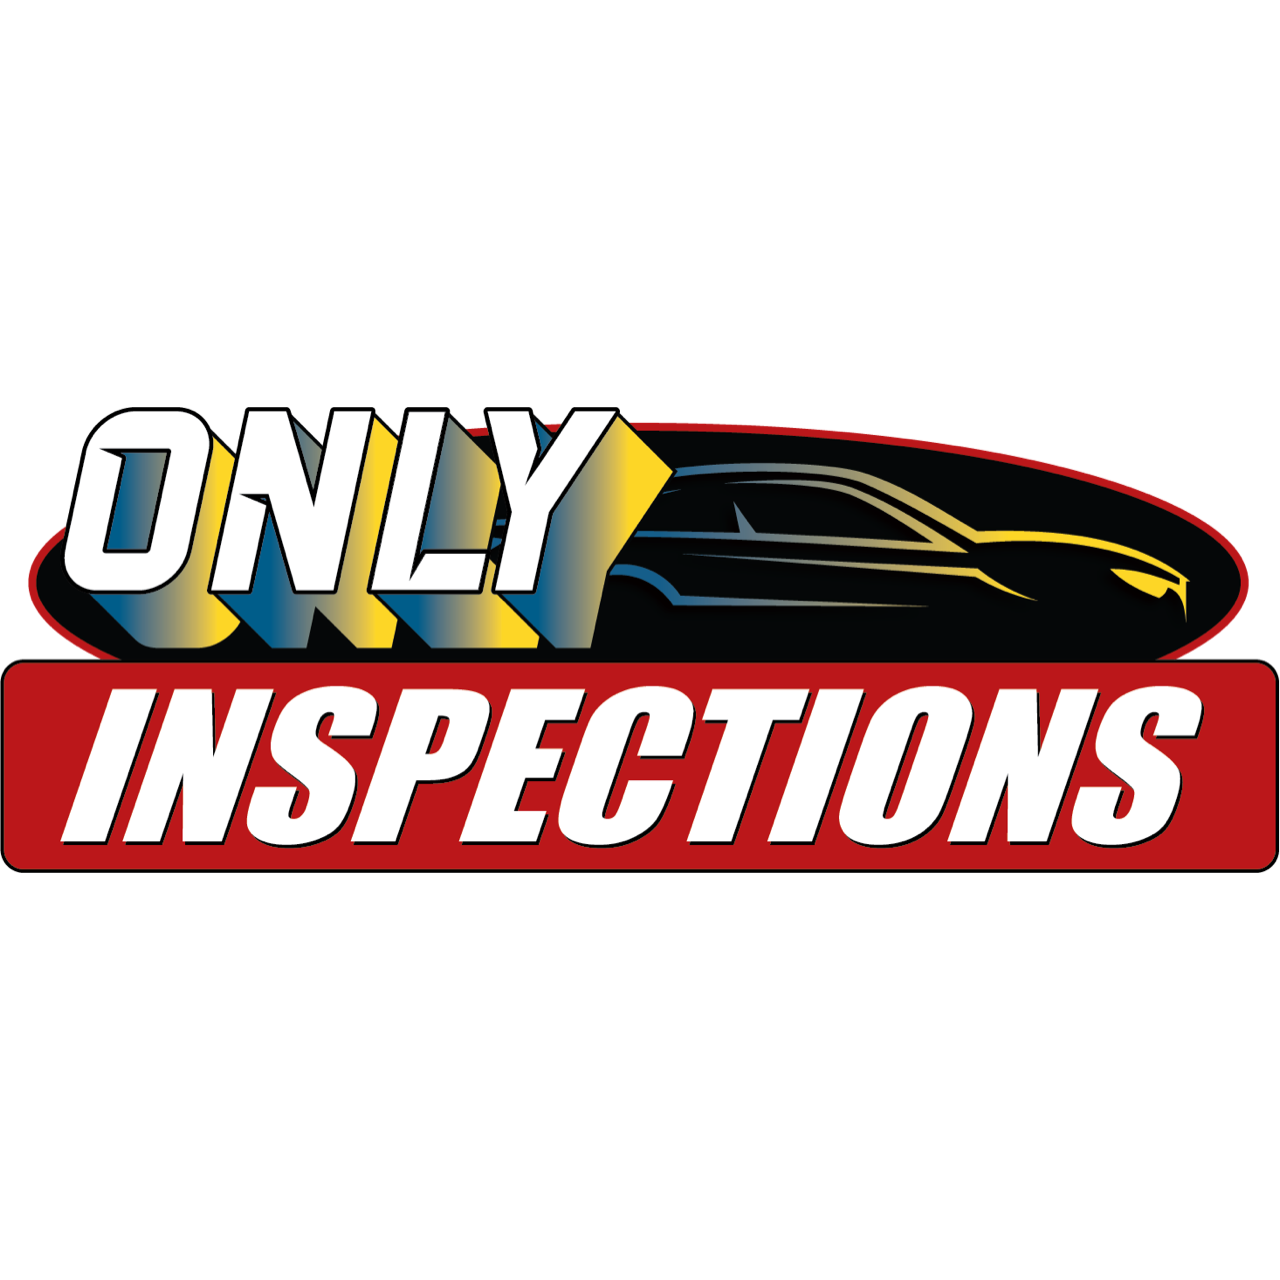 Only Inspections Logo